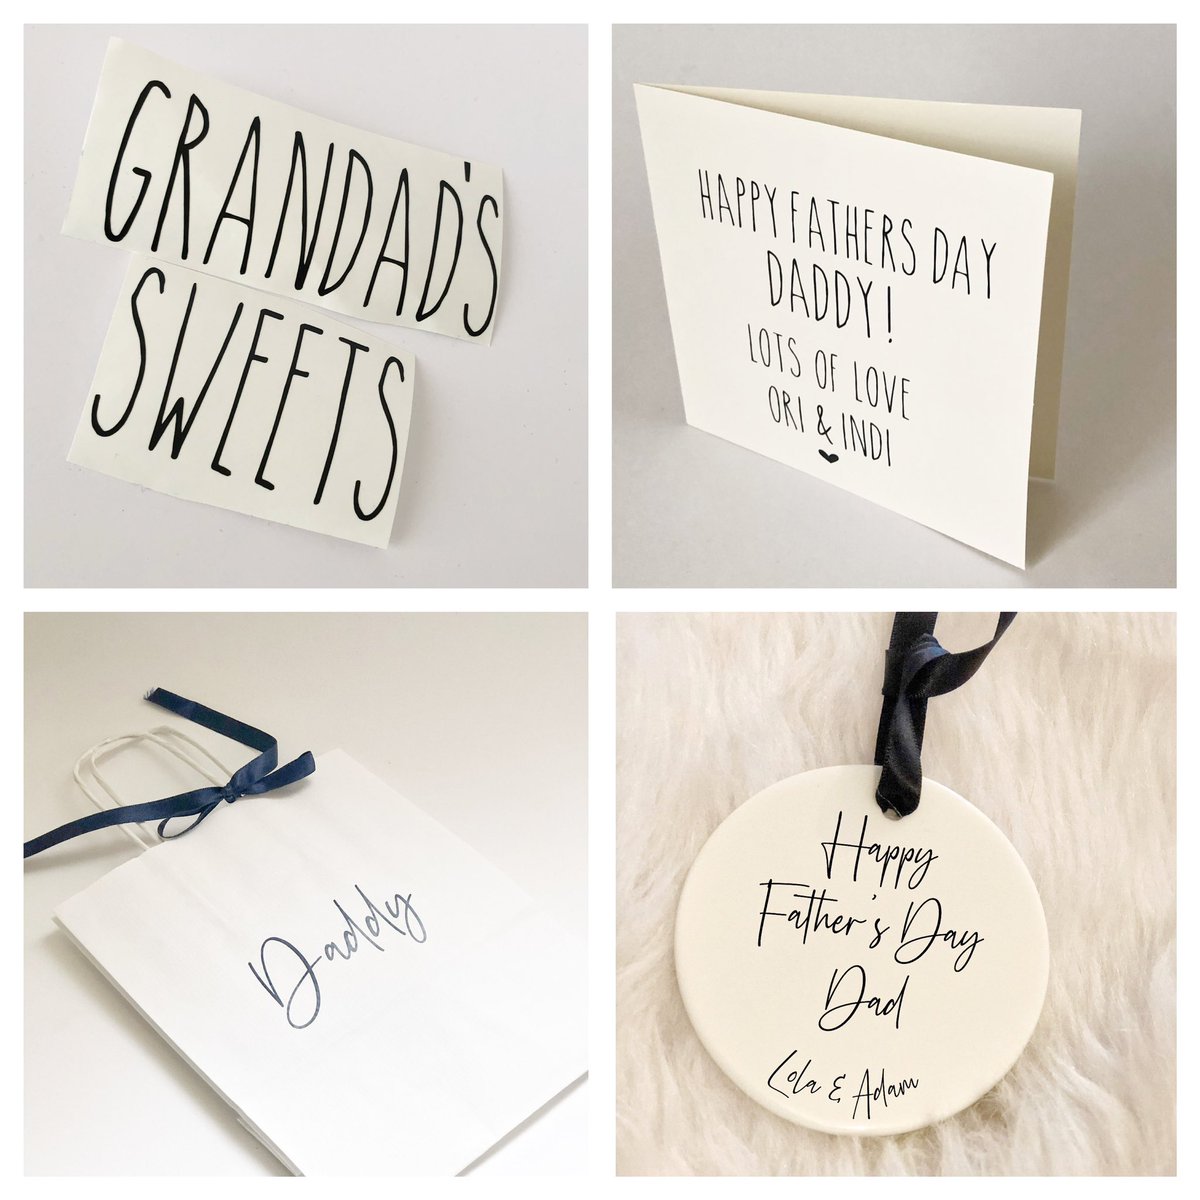 Father’s Day items in the shop- greeting cards, gift bags, stickers and labels. Keepsake gifts 🎁 Bagsoffavours.Etsy.com #elevenseshour #etsy #tuesdayvibe #shopindie #MHHSBD #CraftBizParty #etsysale #fathersday